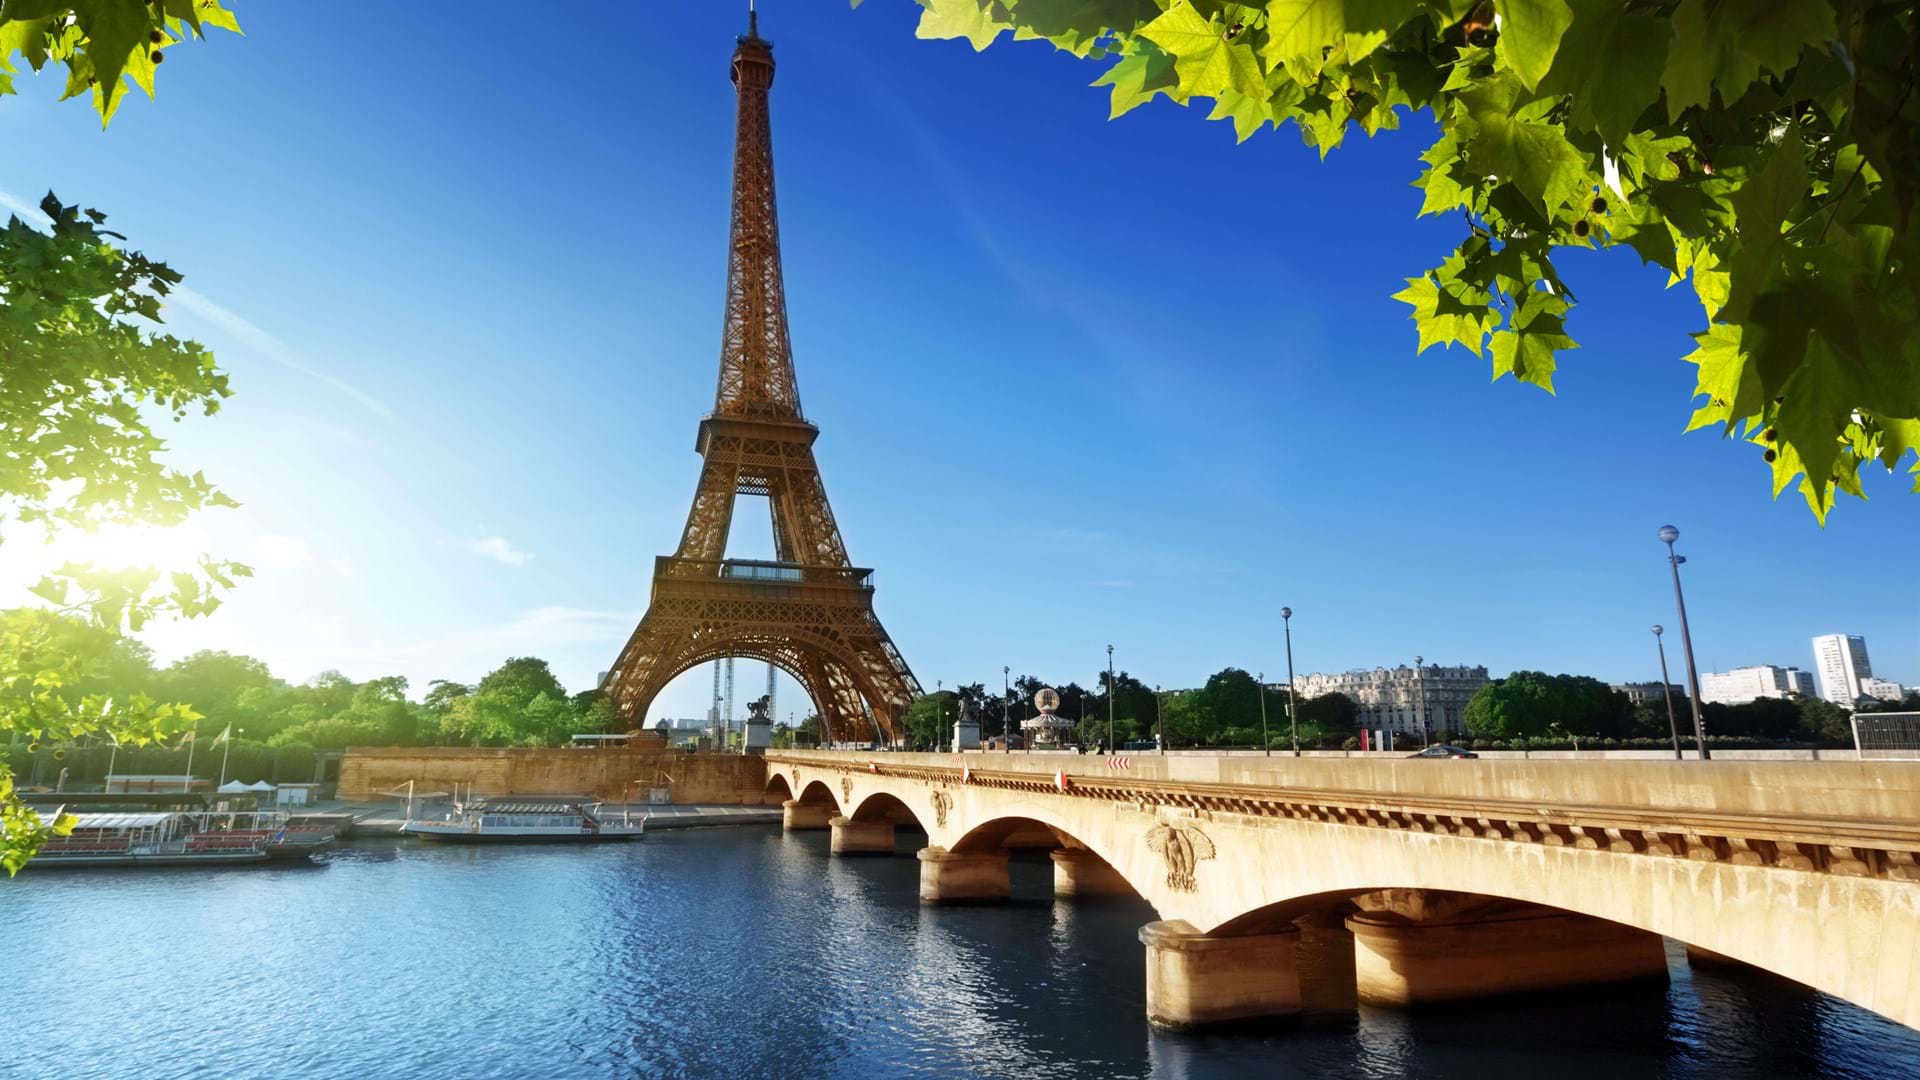 France to consolidate position as most visited country in world, says GlobalData